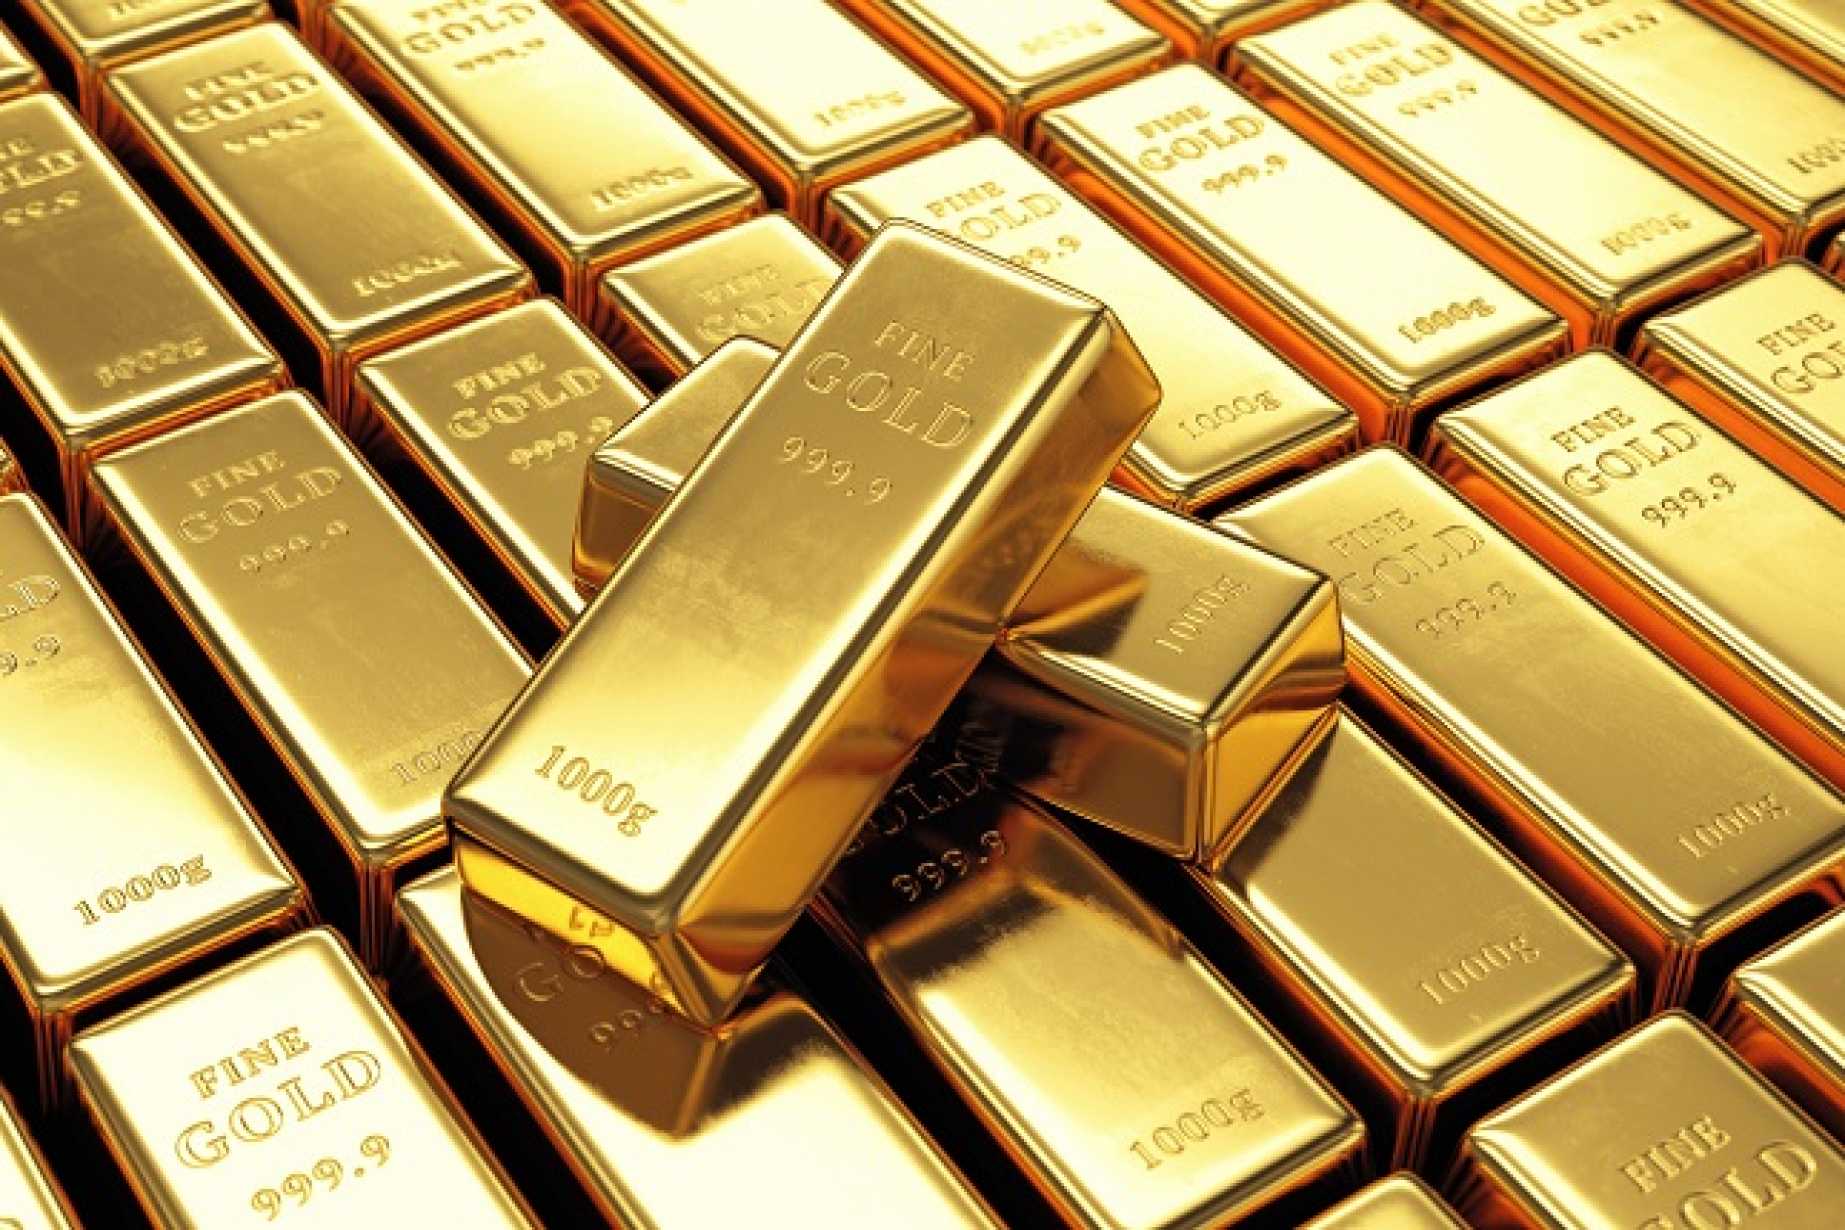 Gold Price Forecast - Gold Markets Continue Explosive Move Higher